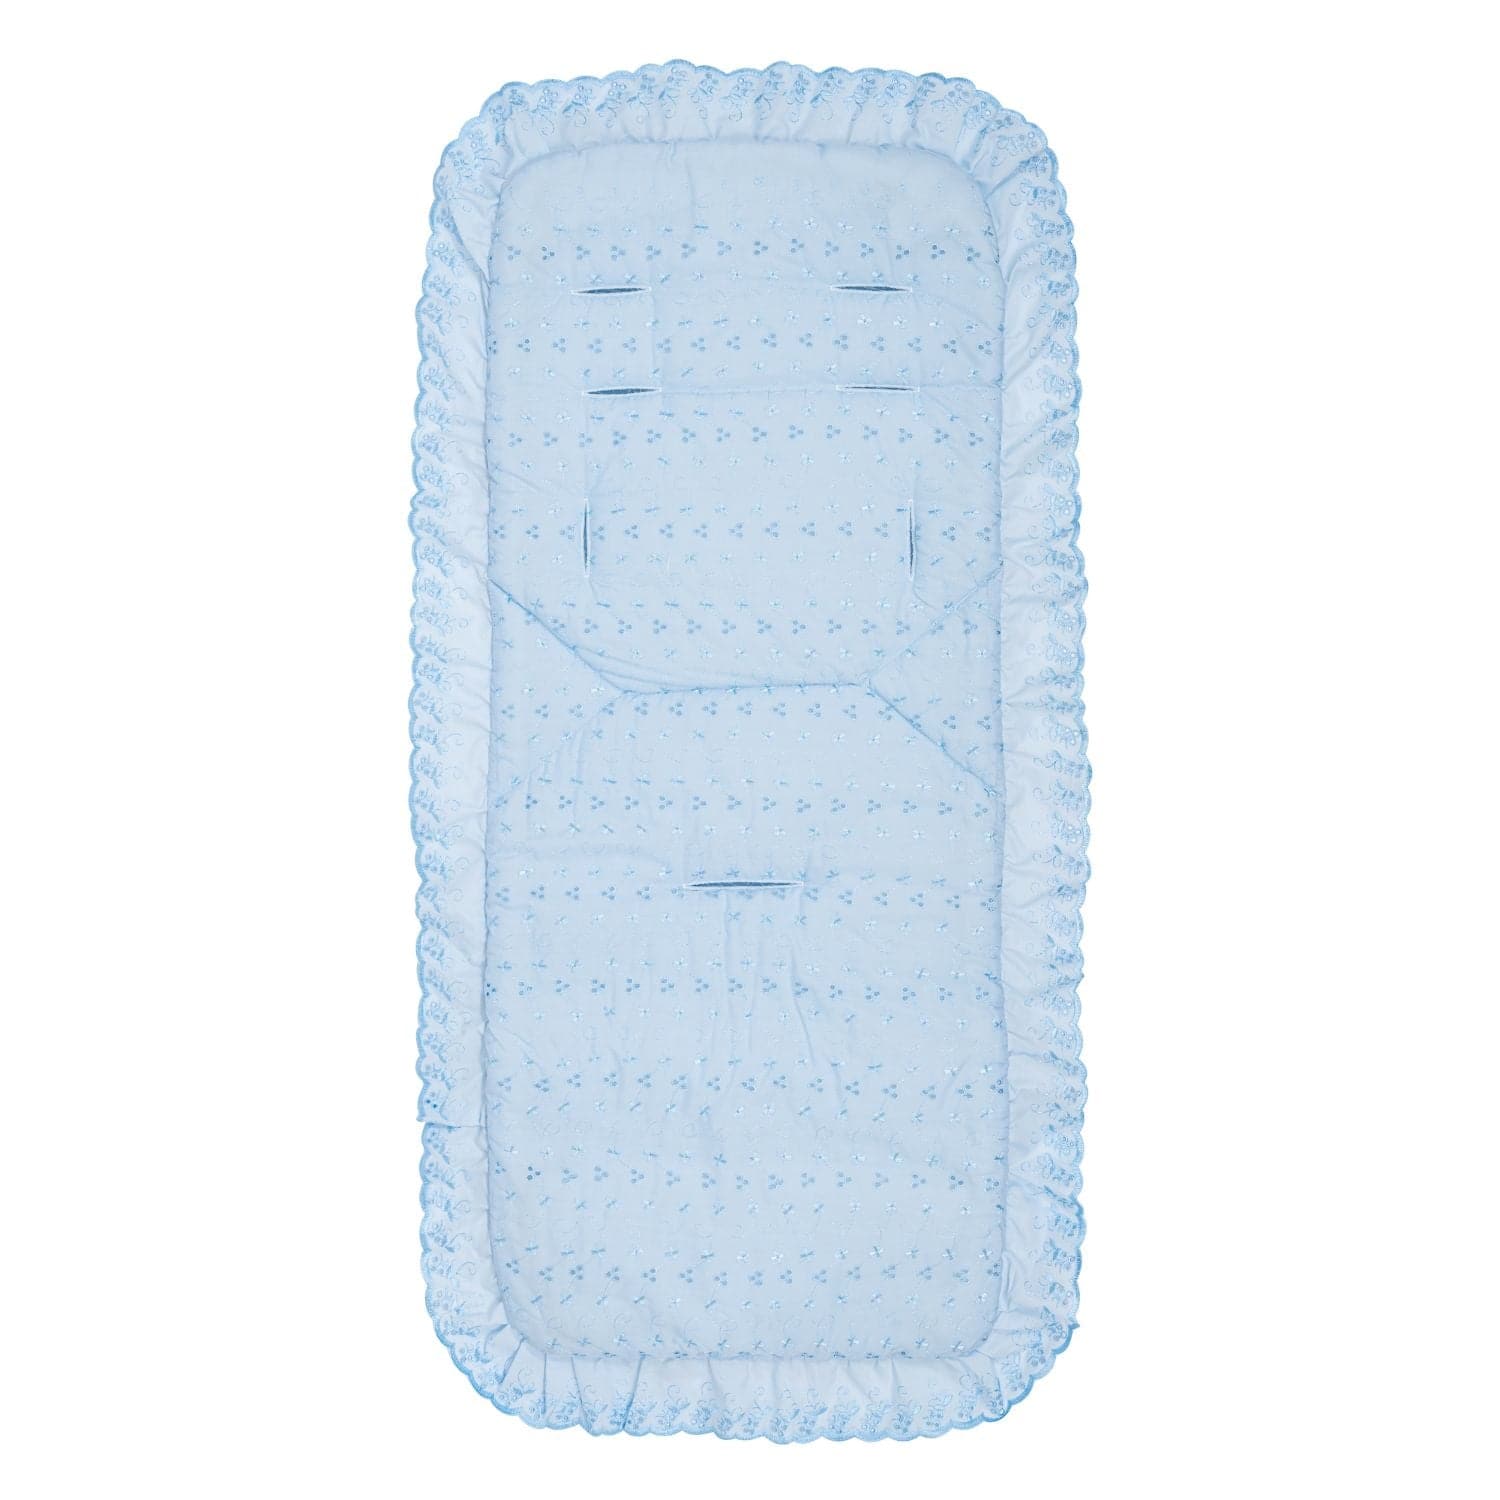 Broderie Anglaise Pushchair Seat Liner Compatible with GB - Fits All Models - For Your Little One